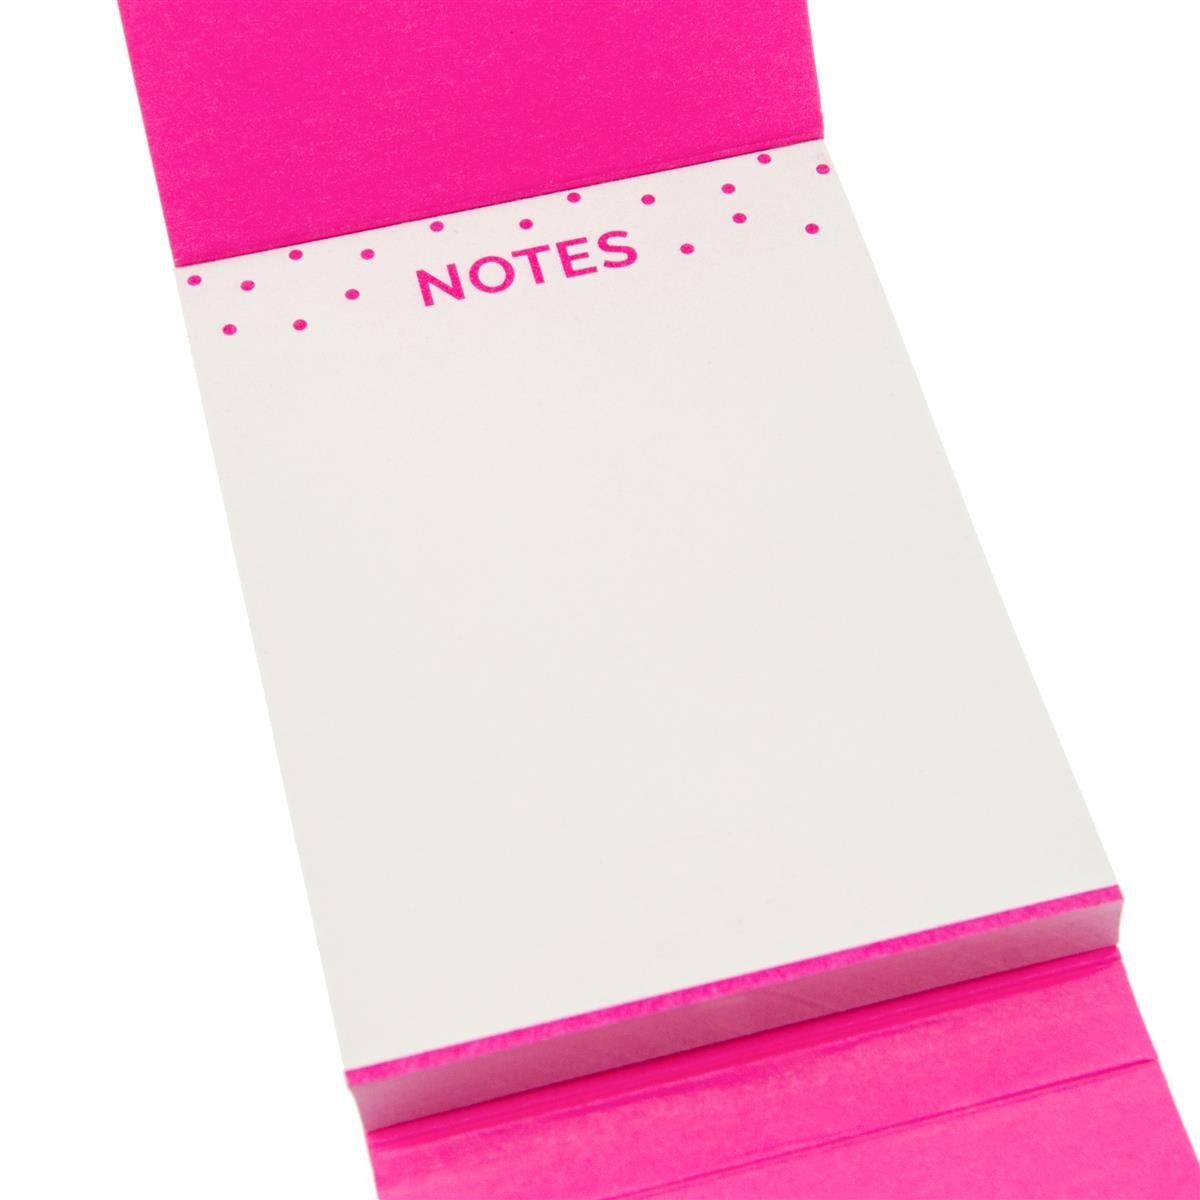 Heck Yeah Pocket Notepad in Blush Pink and Silver Glitter